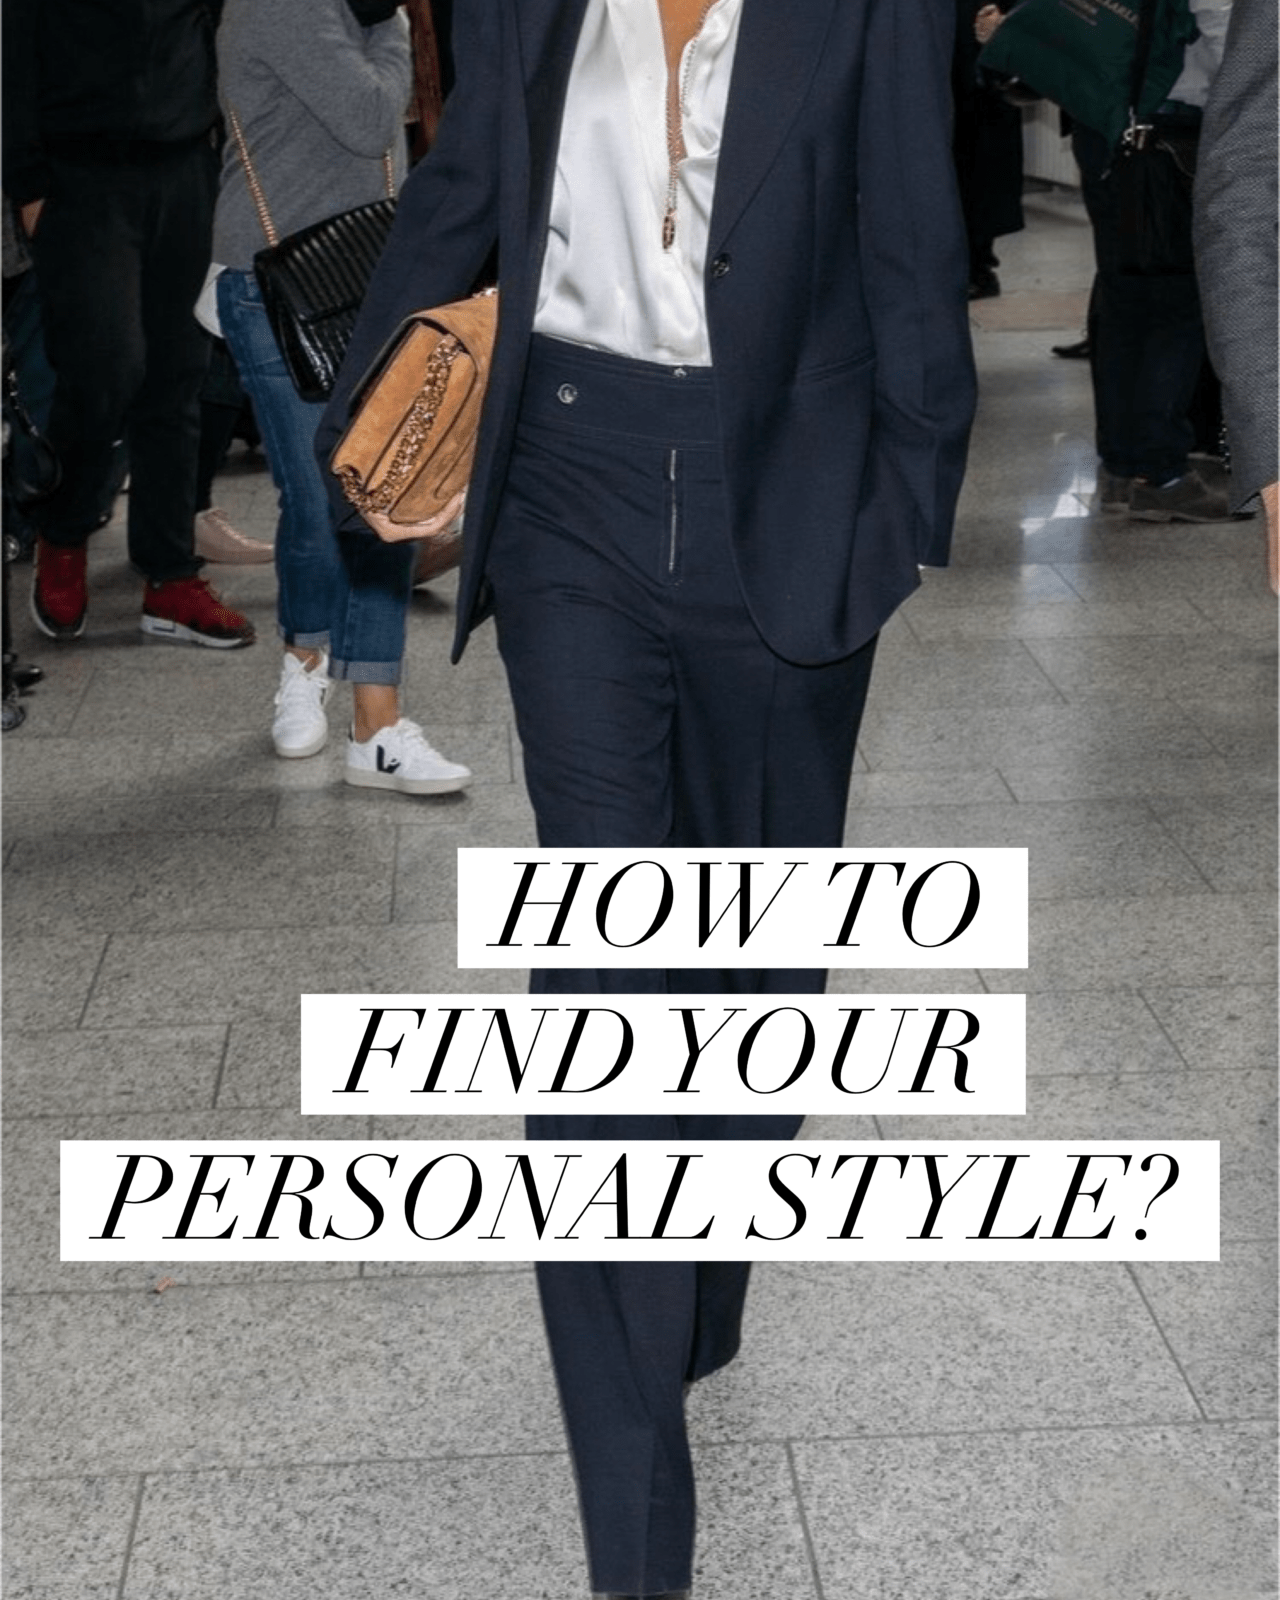 HOW TO FIND YOUR PERSONAL STYLE?